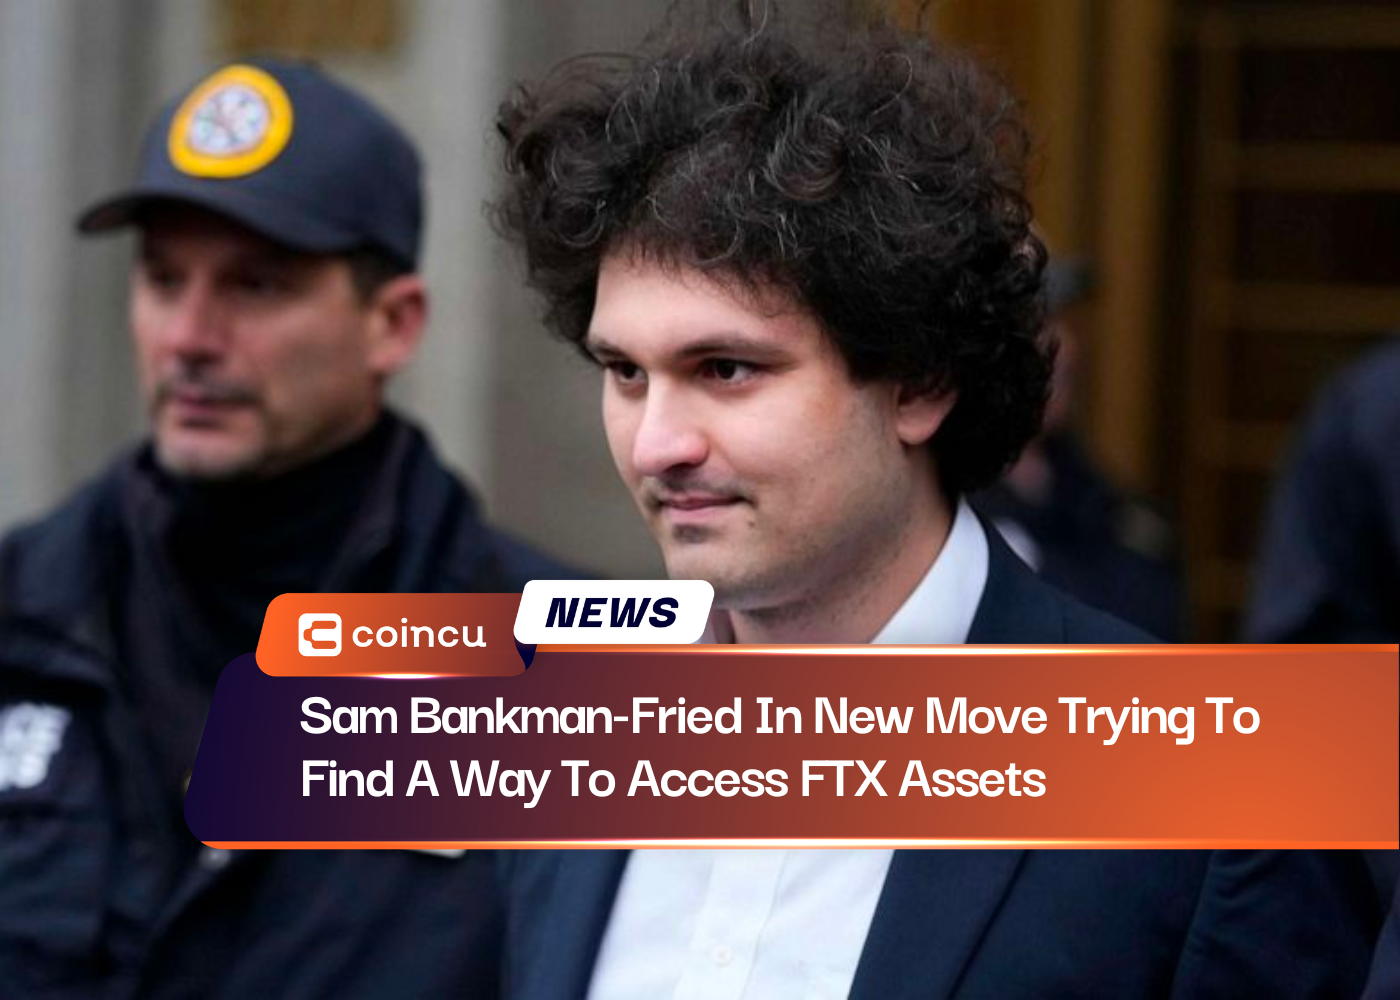 Sam Bankman-Fried In New Move Trying To Find A Way To Access FTX Assets